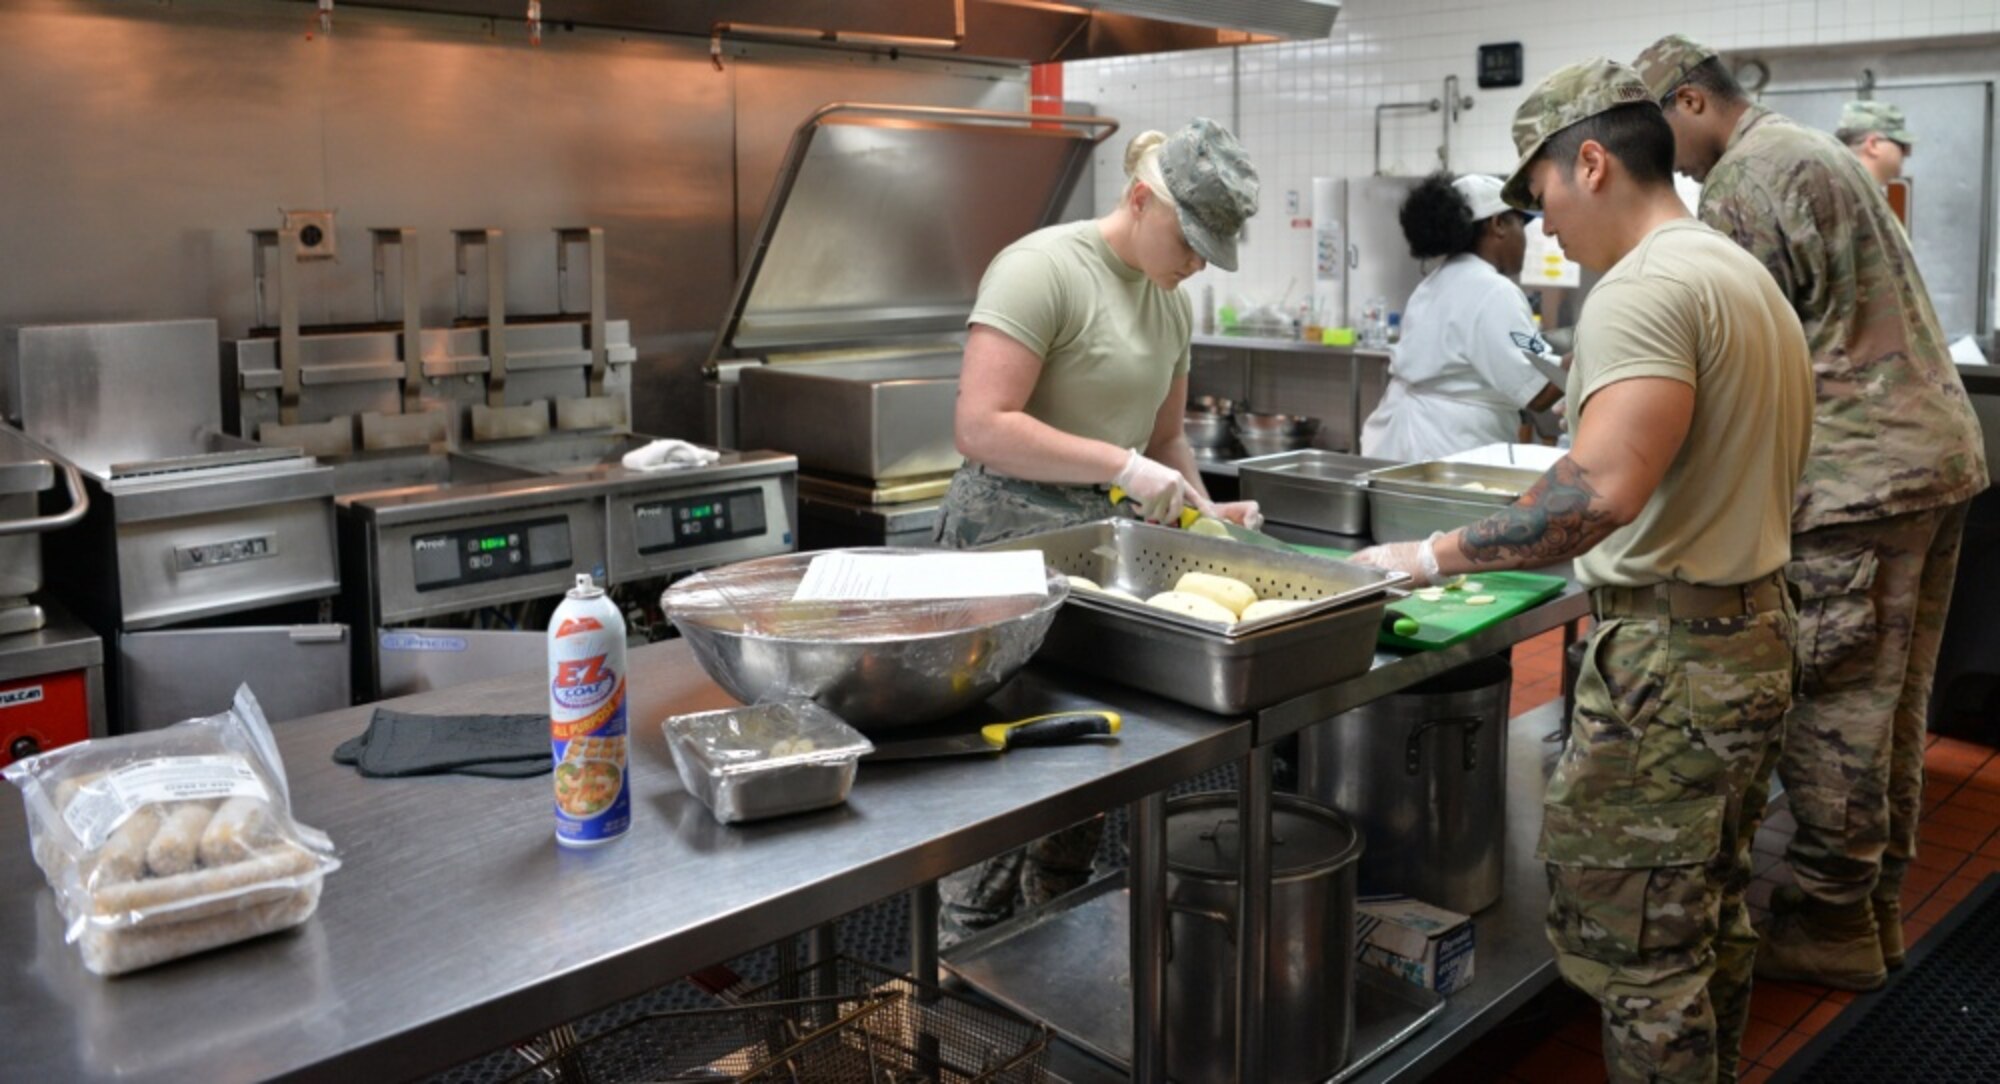 The food service team at the Crosswinds Dining Facility prepares lunch for service members at Nellis Air Force Base, Nevada, July 25, 2019. They work together to ensure new members are properly trained. Augmentees were sent to Nellis to help with the influx of customers during Red Flag and other exercises throughout the year. (U.S. Air Force photo by Tech. Sgt. Bryan Magee)